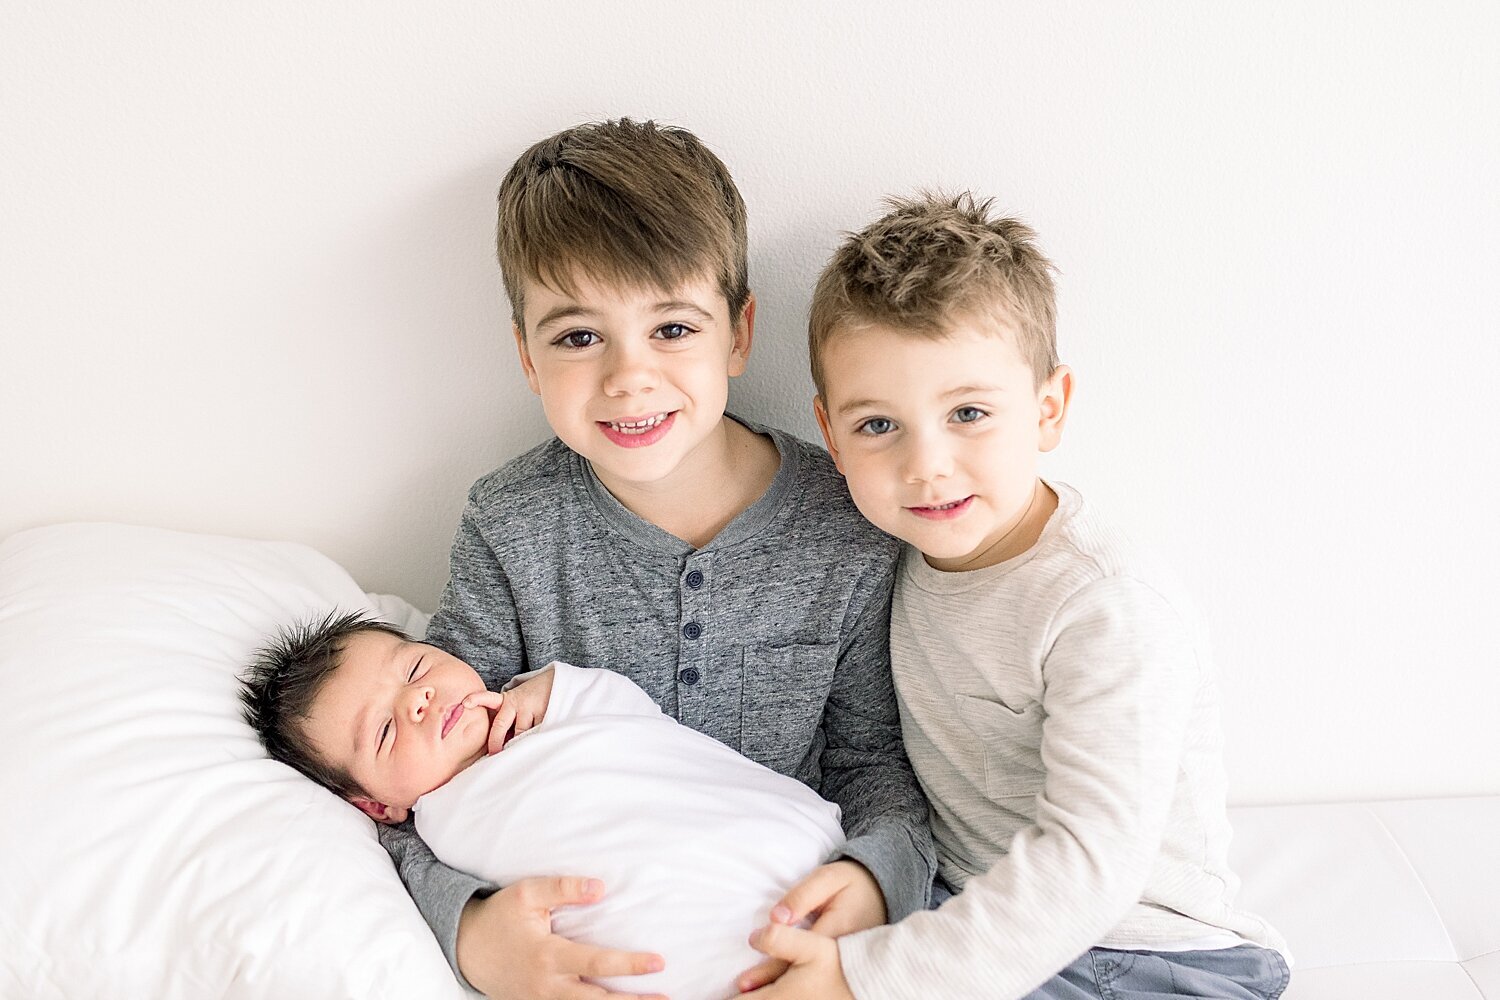 Two big brothers hold their newborn baby brother during photoshoot with Newport Beach Newborn Photographer, Ambre Williams Photography.